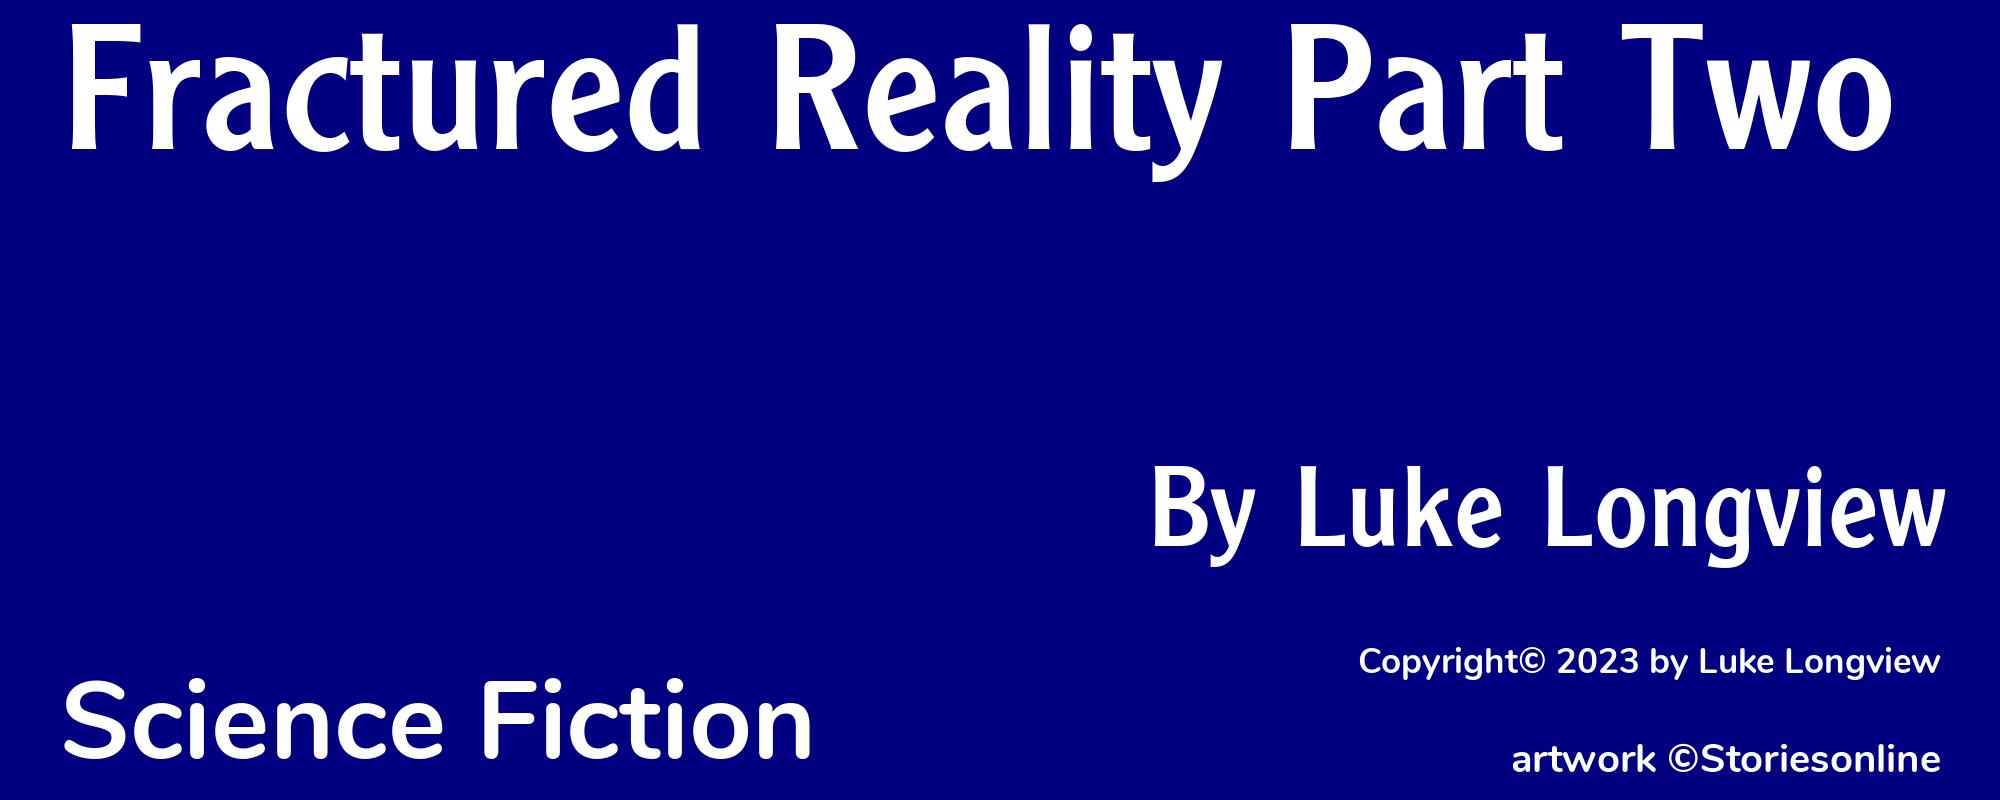 Fractured Reality Part Two - Cover